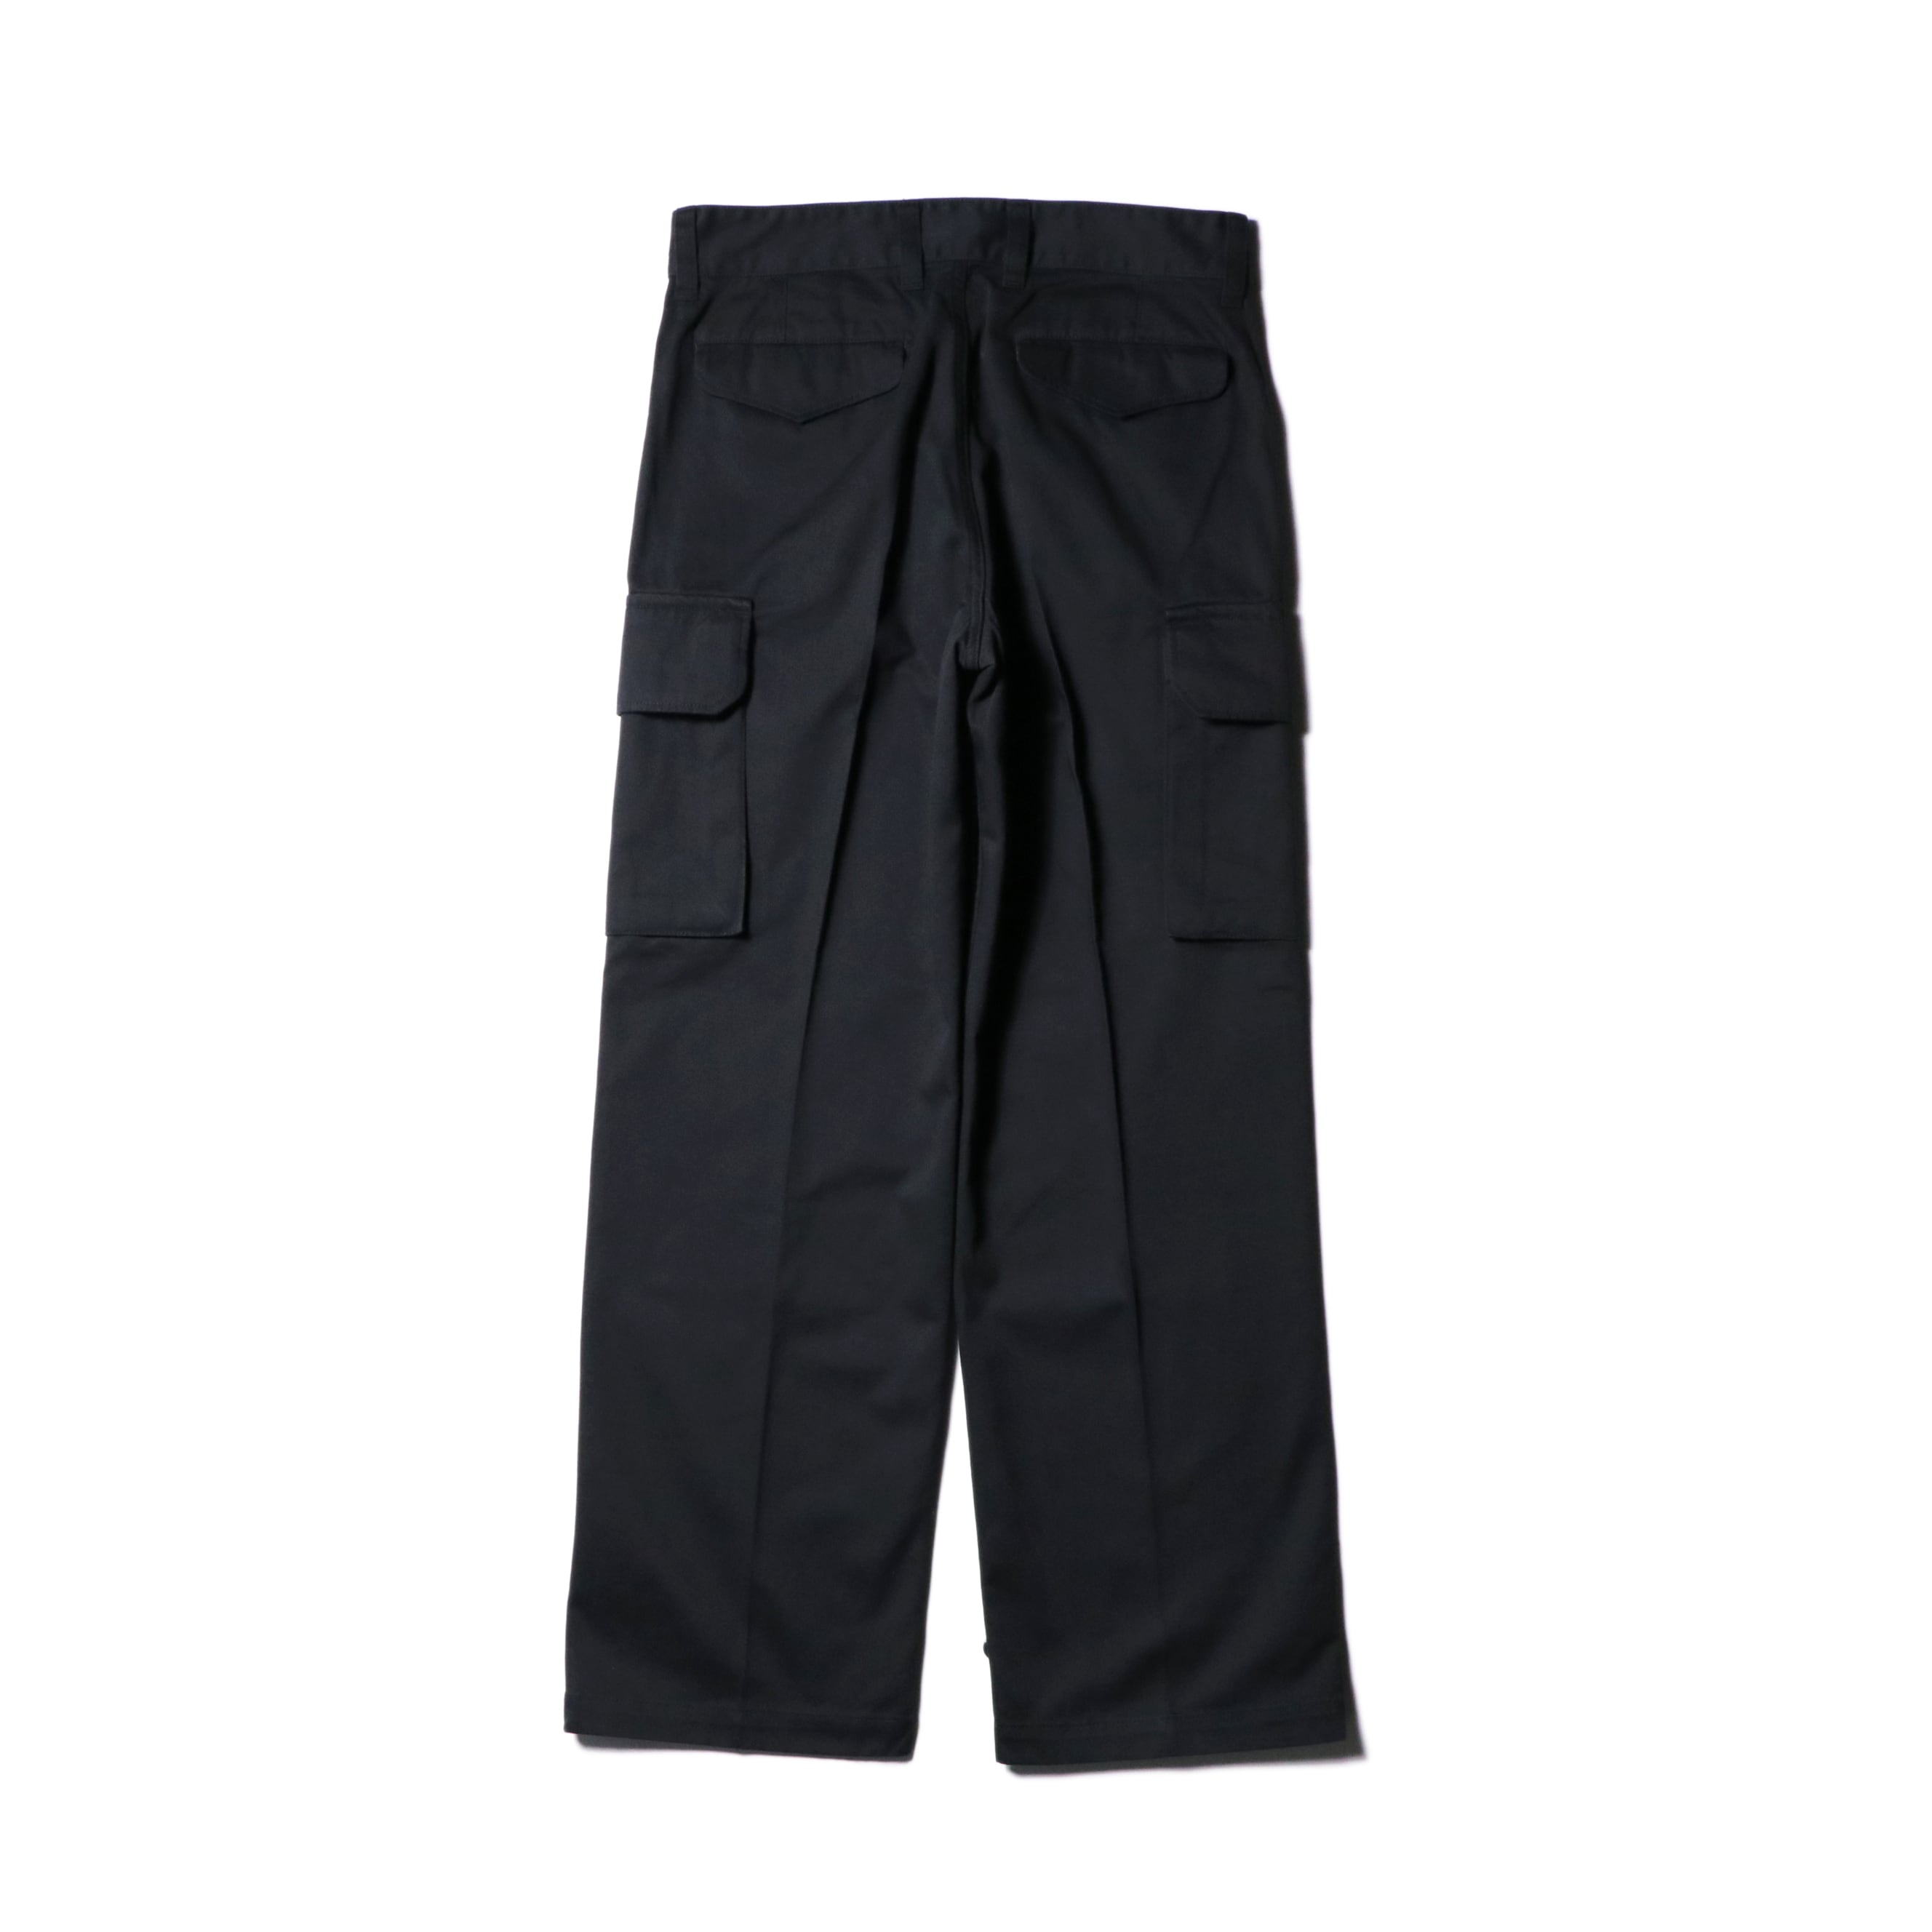 Improved M-47 cargo trouser